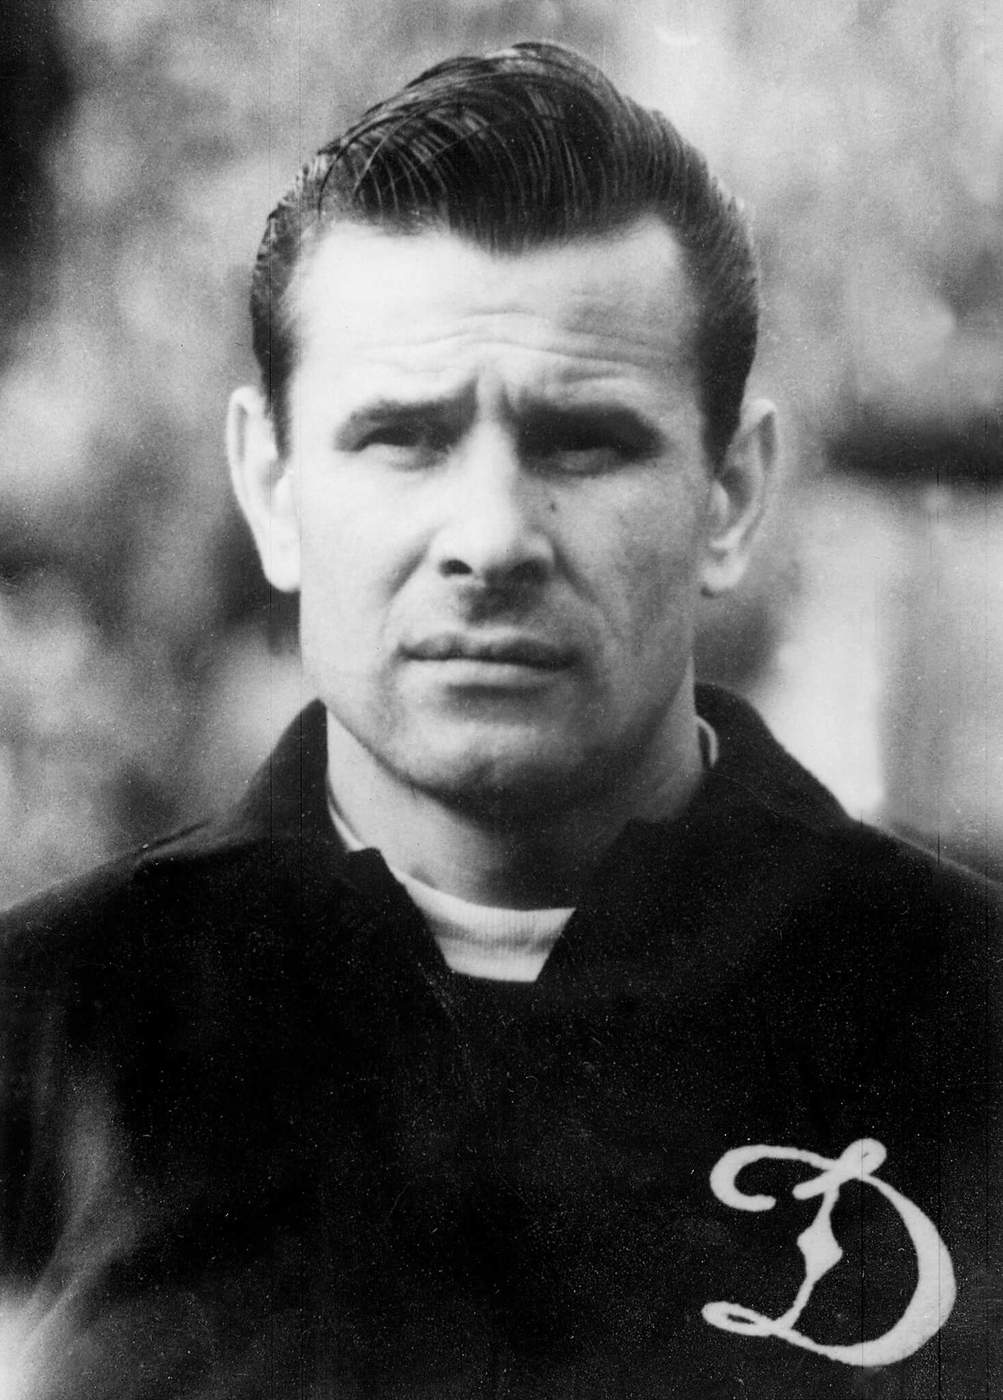 Yashin was voted the best goalkeeper of the 20th century by the International Federation of Football History &amp;amp; Statistics